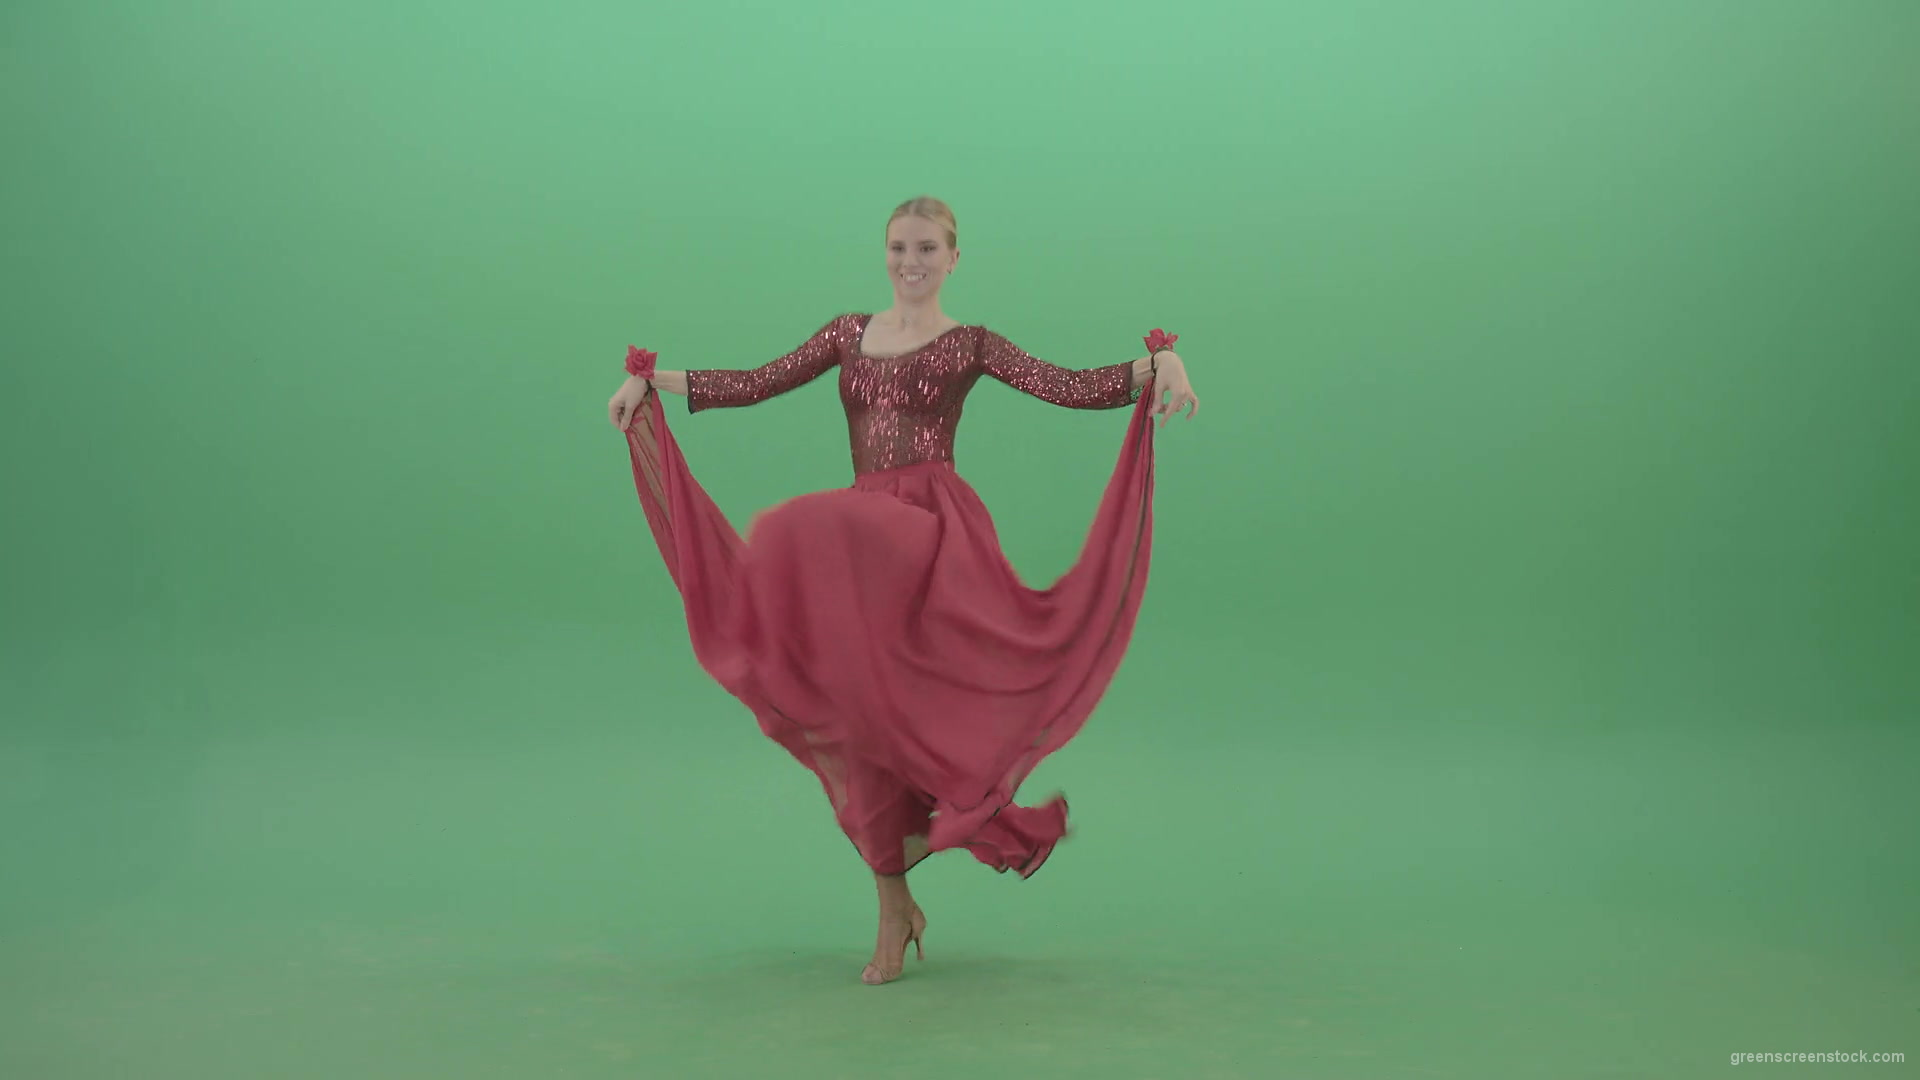 Moulin-rouge-dancing-girl-in-red-dress-jumping-on-green-screen-4K-Video-Footage-1920_006 Green Screen Stock